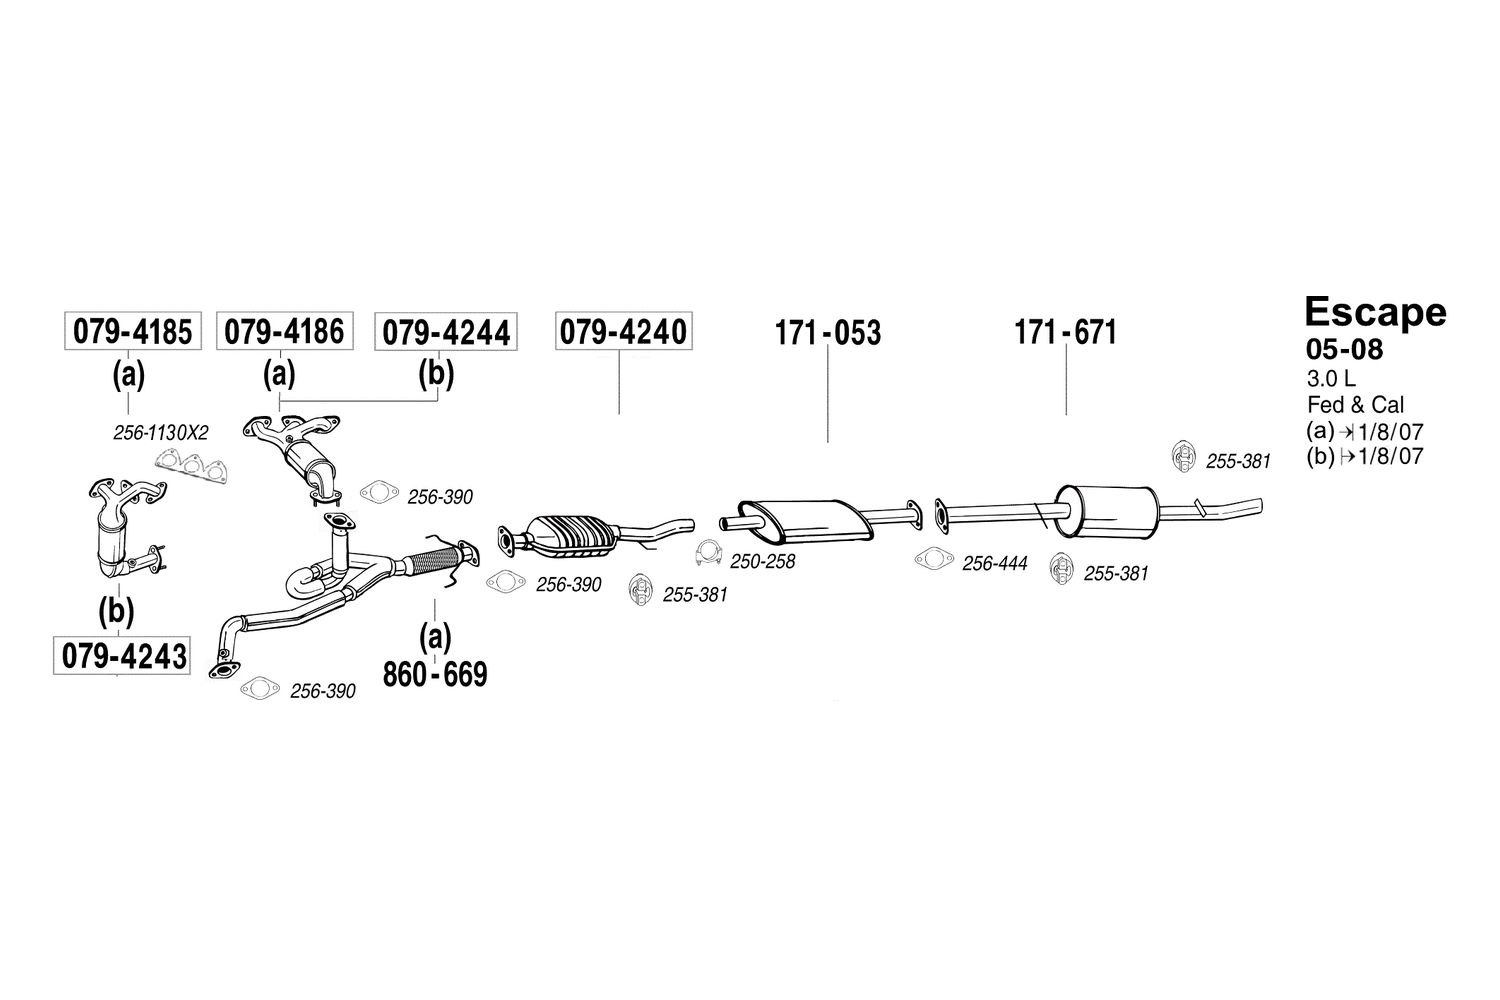 2001 Ford Escape Exhaust System Diagram - General Wiring Diagram